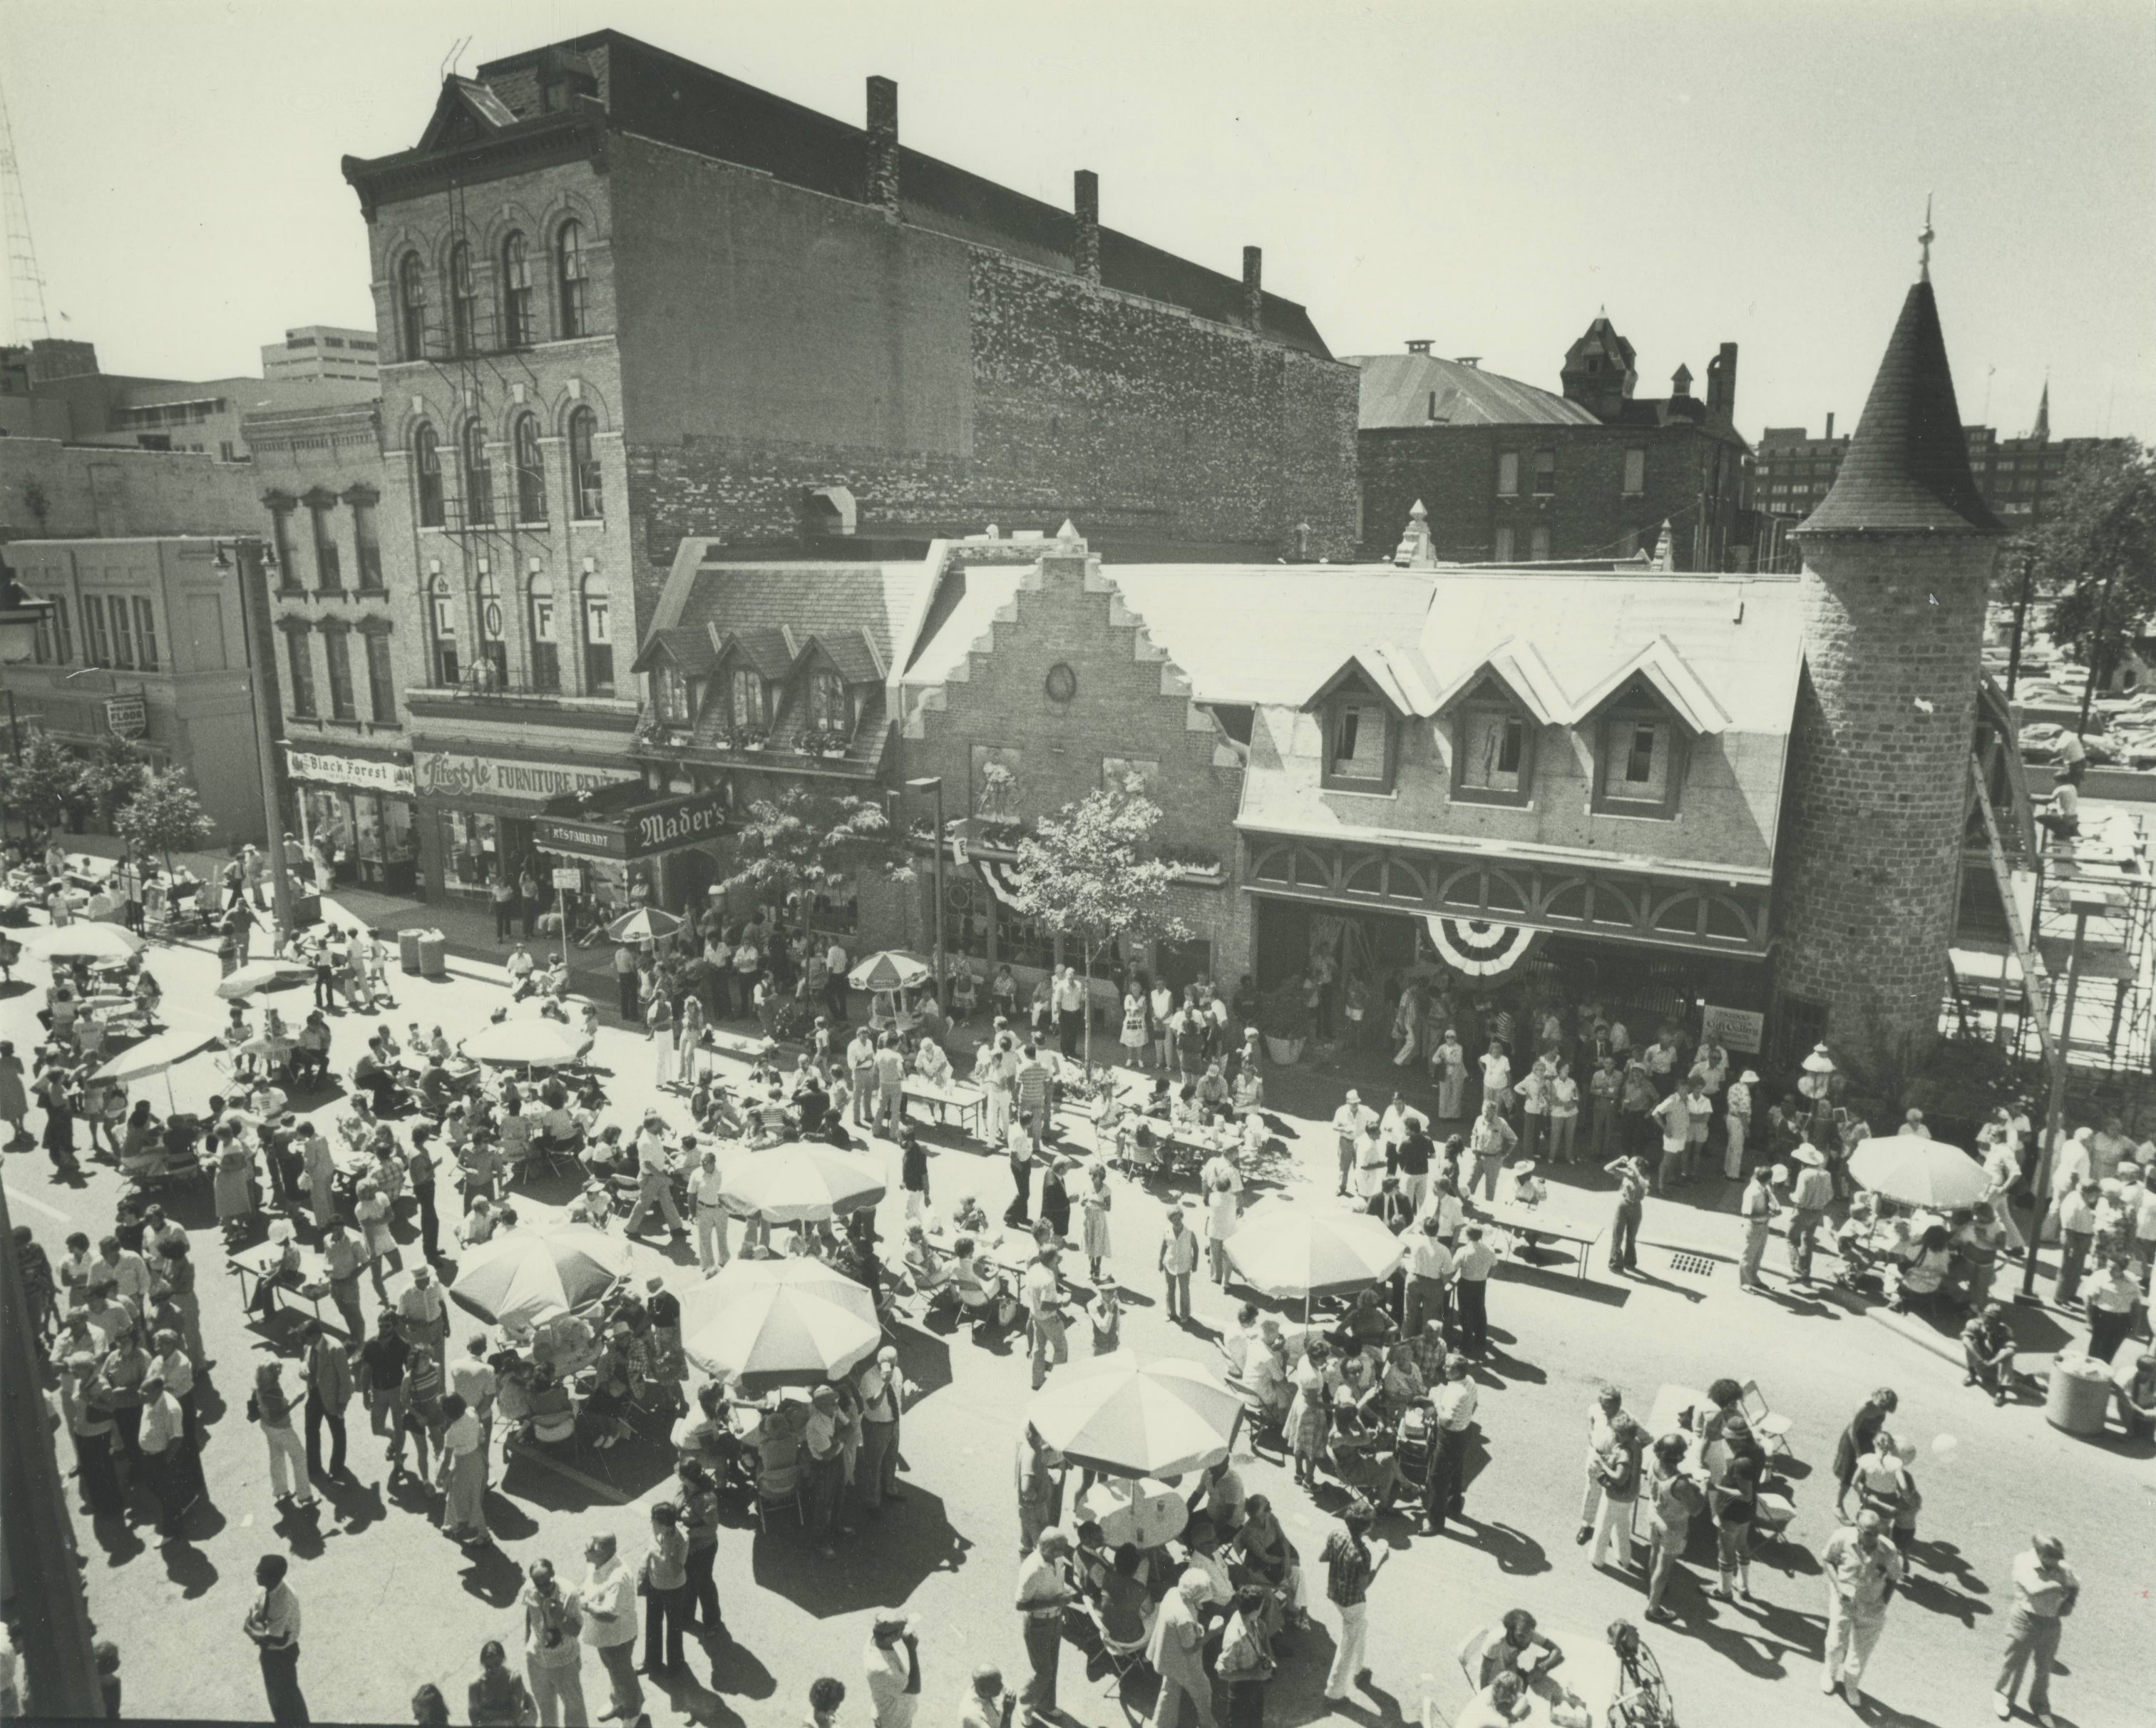 In August 1980, Usinger's Famous Sausage celebrated its 100th year of business with a block party. 